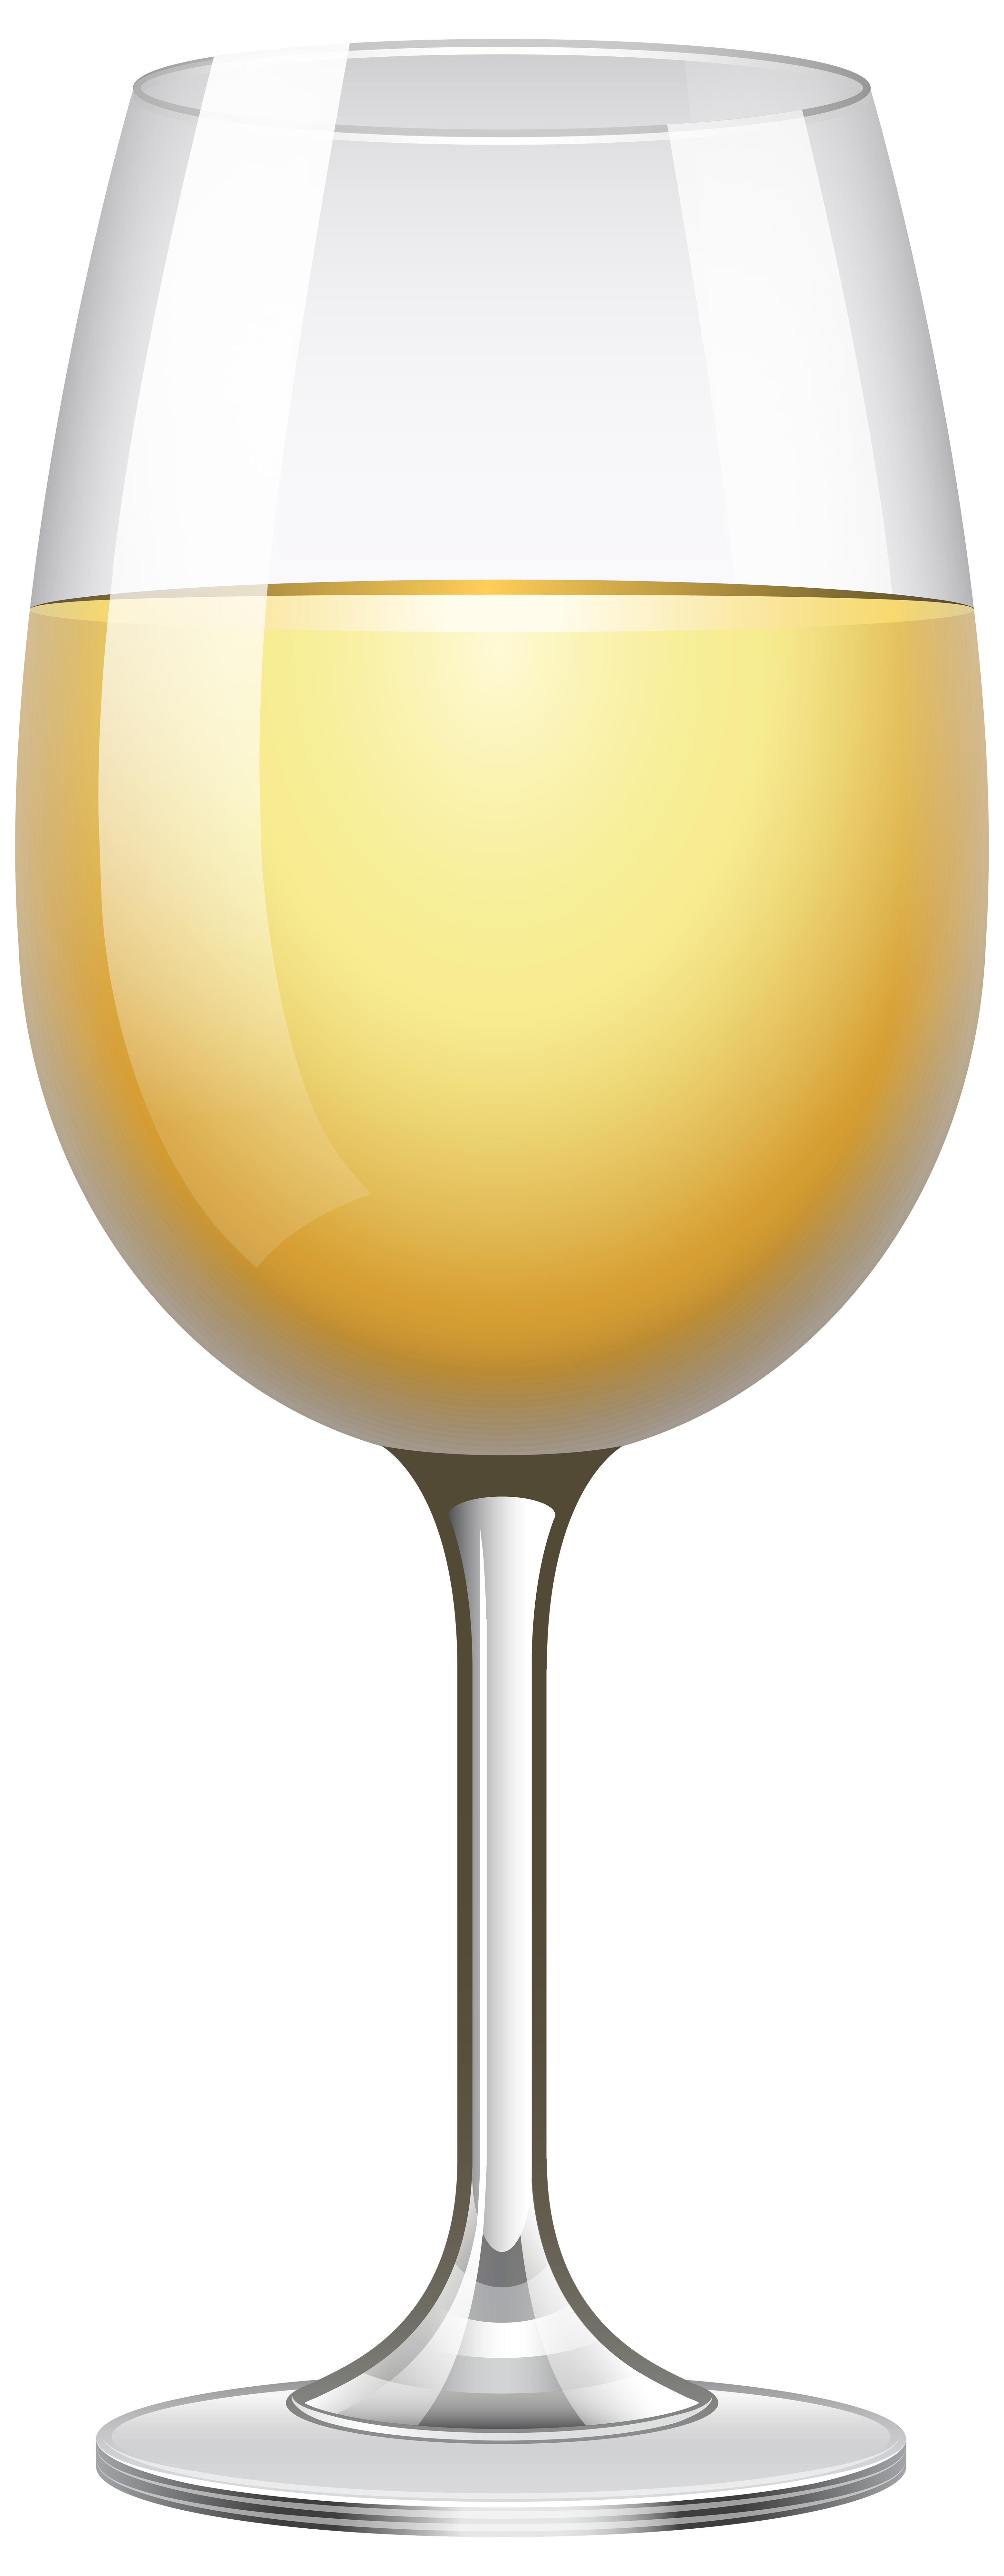 Free Transparent Wine Cliparts, Download Free Clip Art, Free